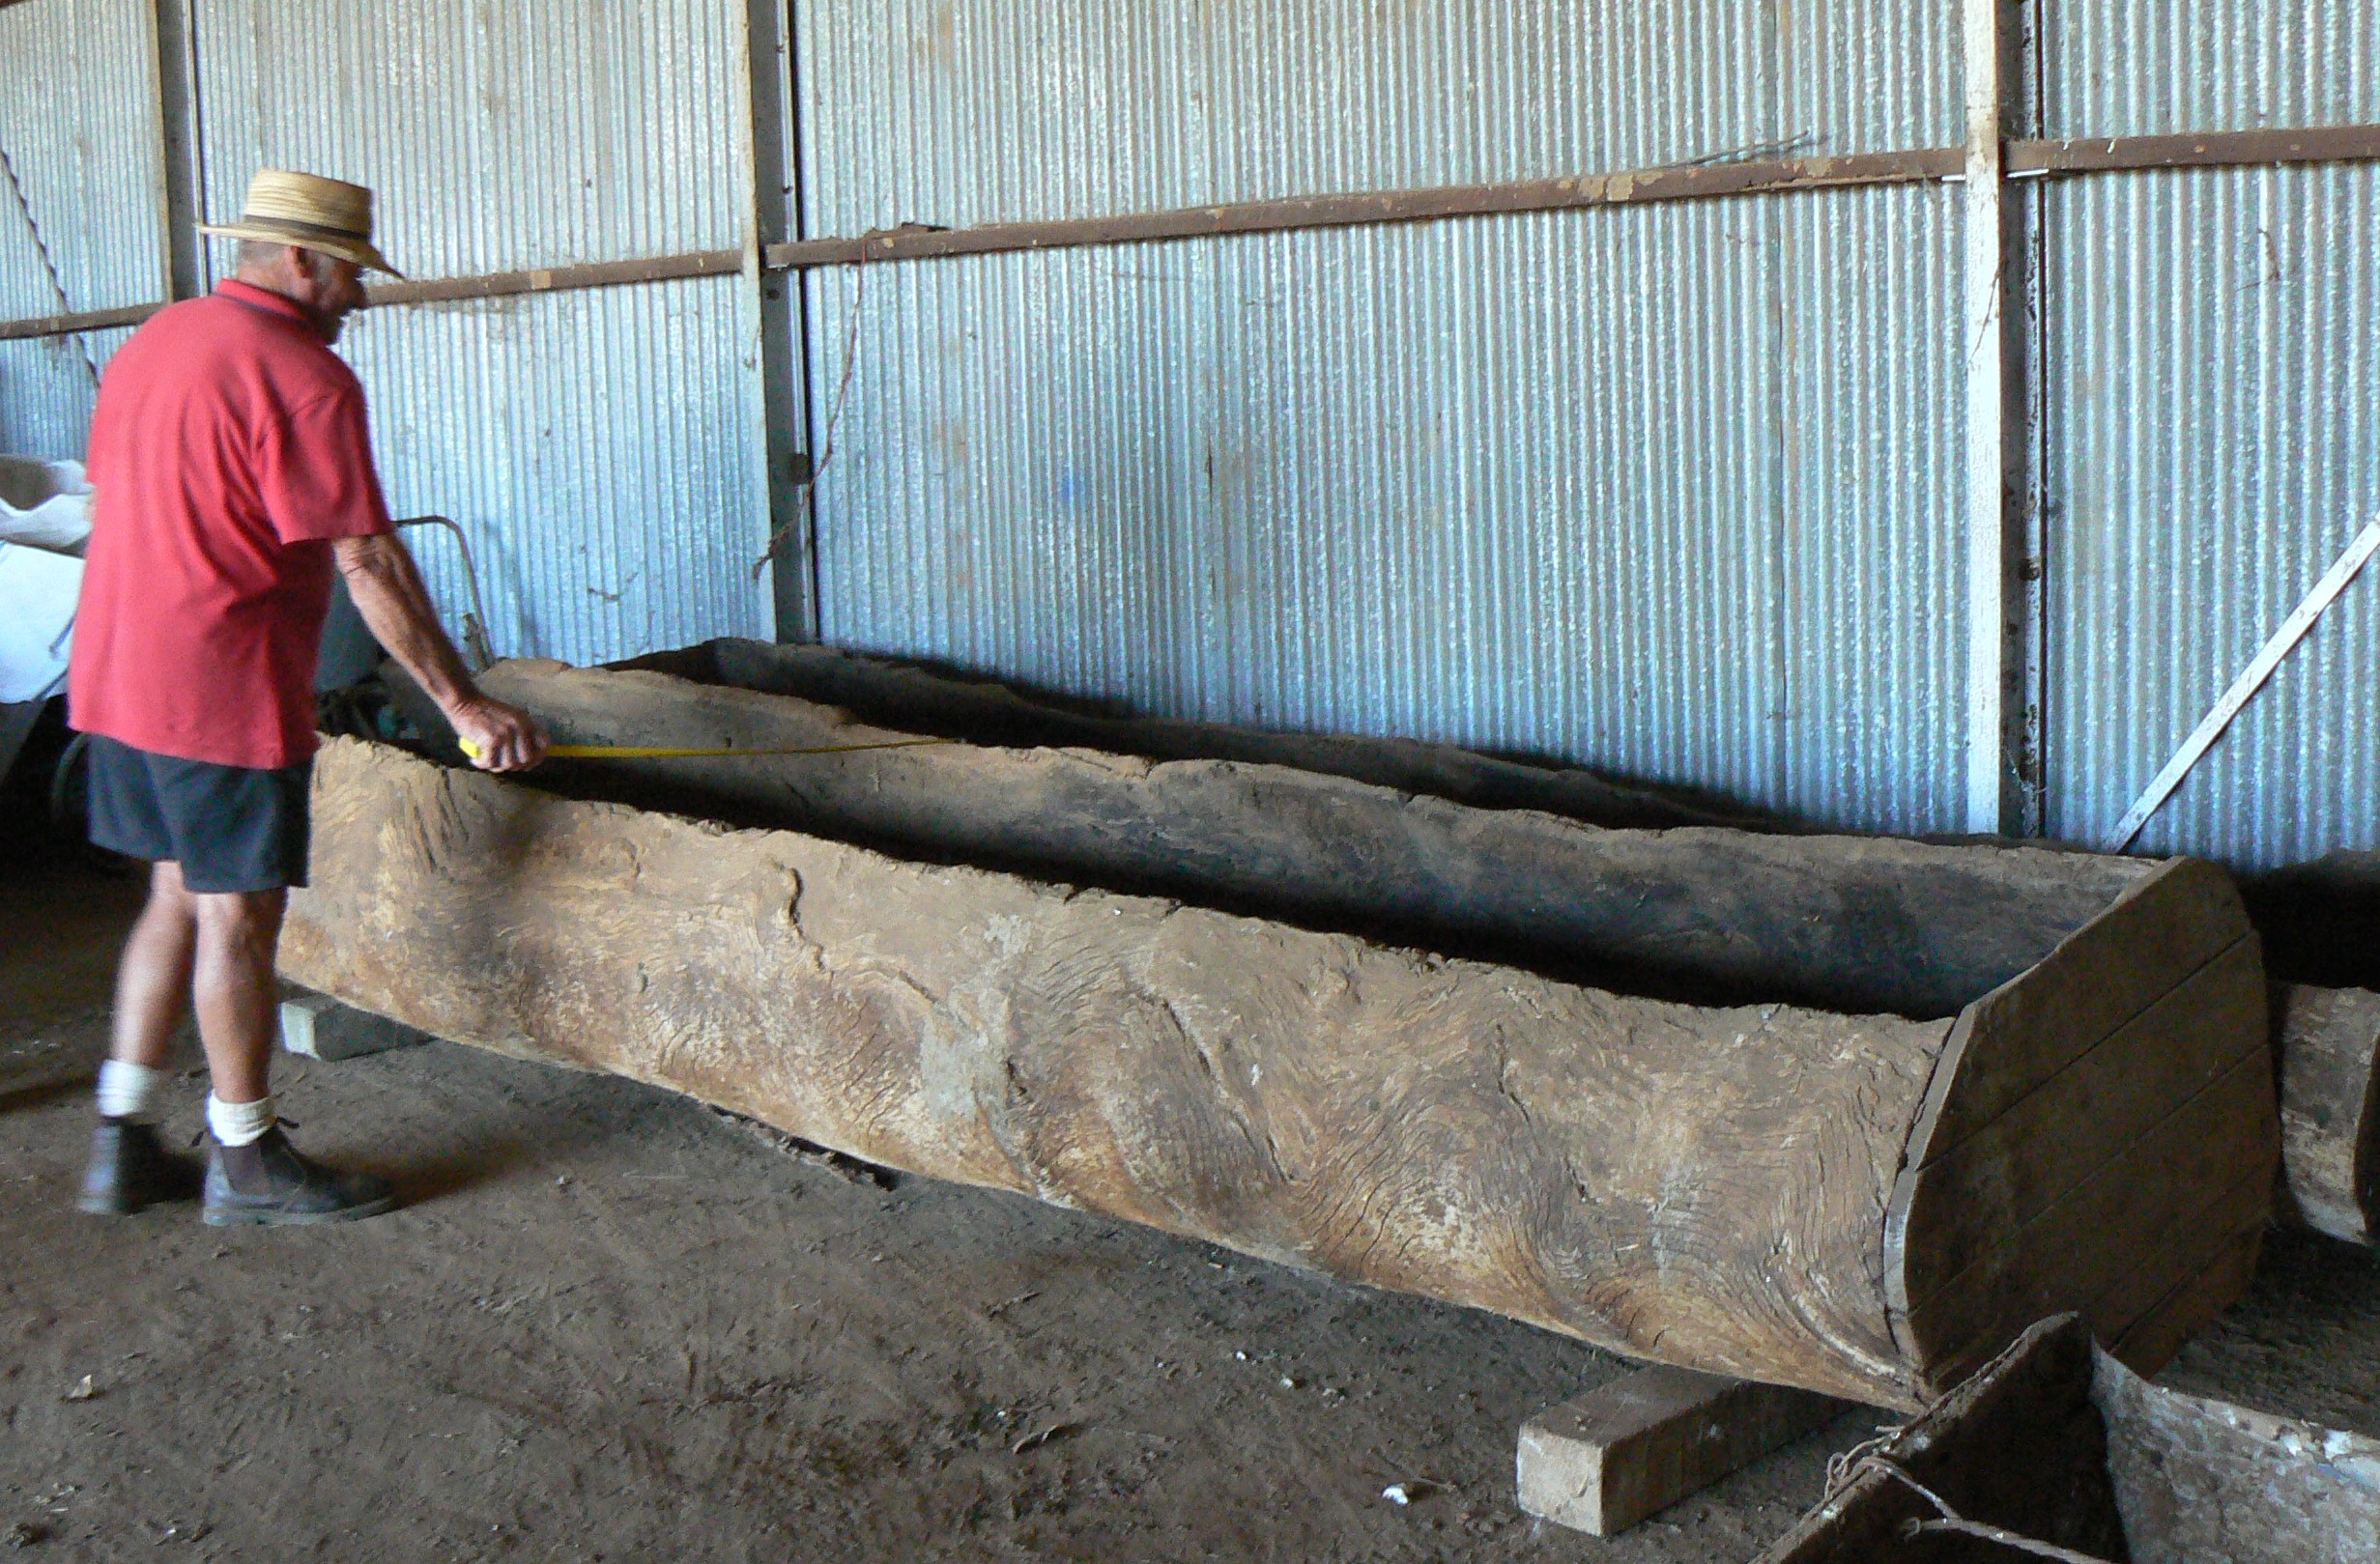 Desmond Wykes measuring the feed trough, Photo by Nicole McLennan, National Museum of Australia